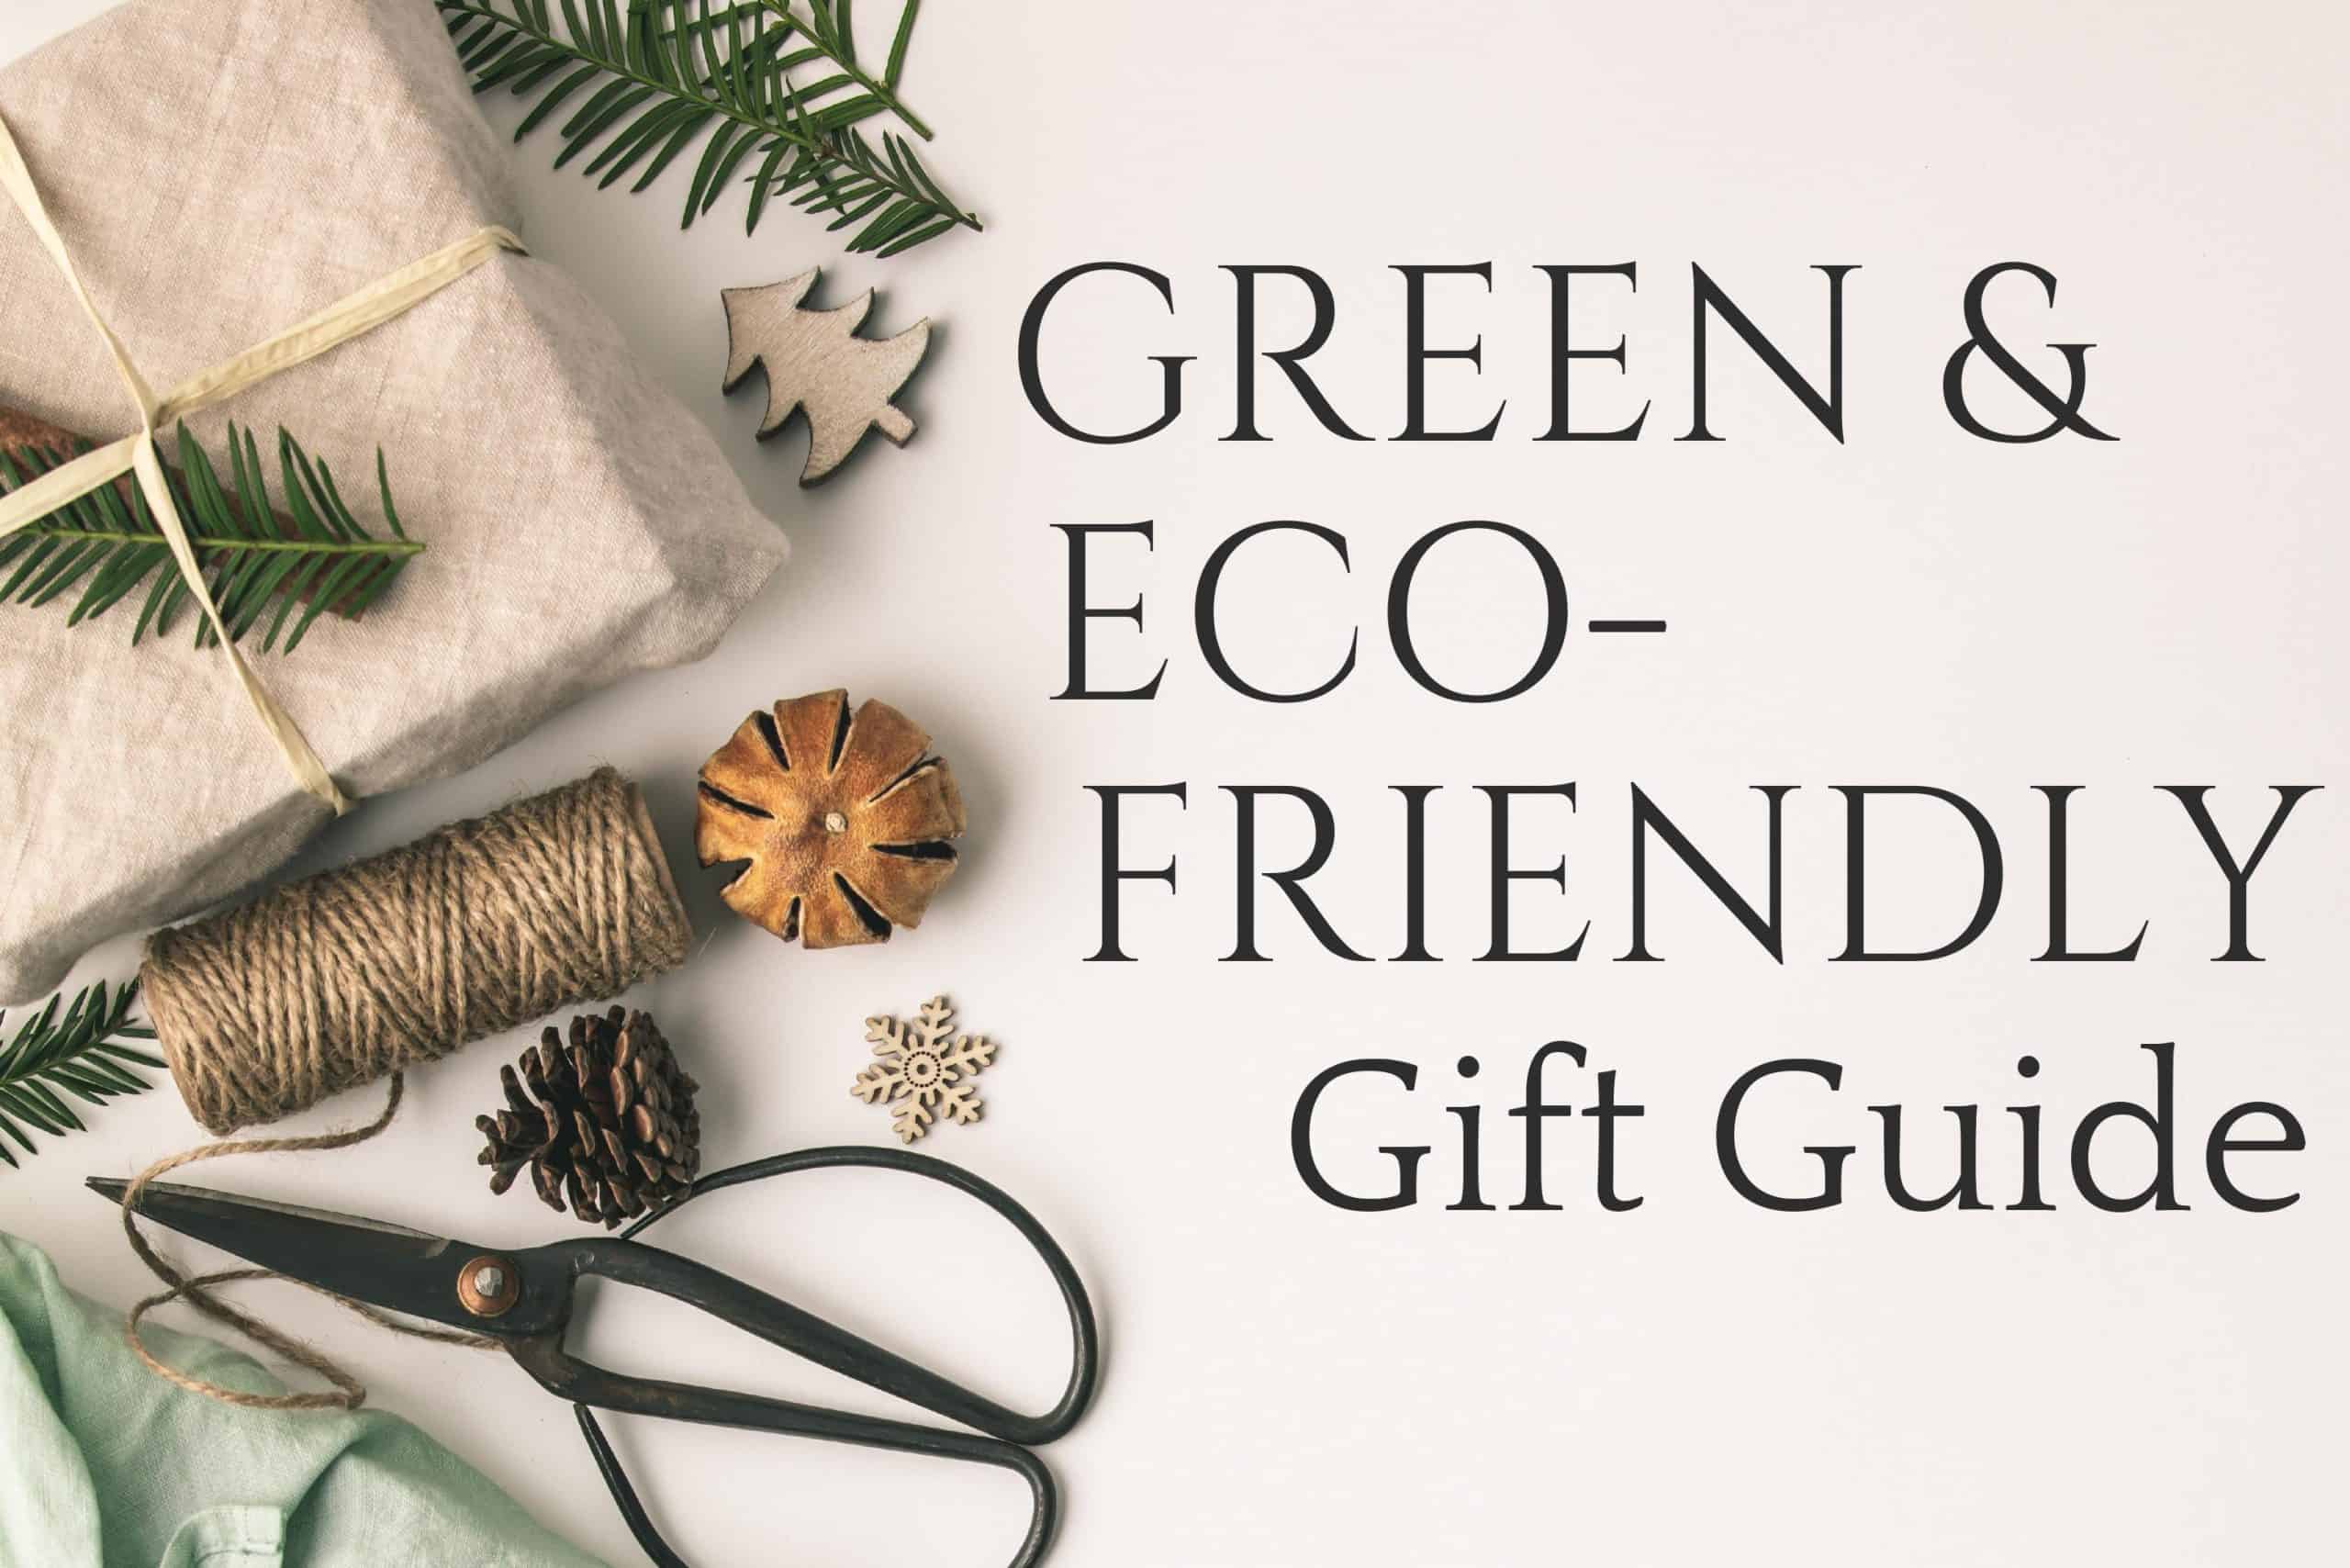 Green & Eco-Friendly Gift Guide